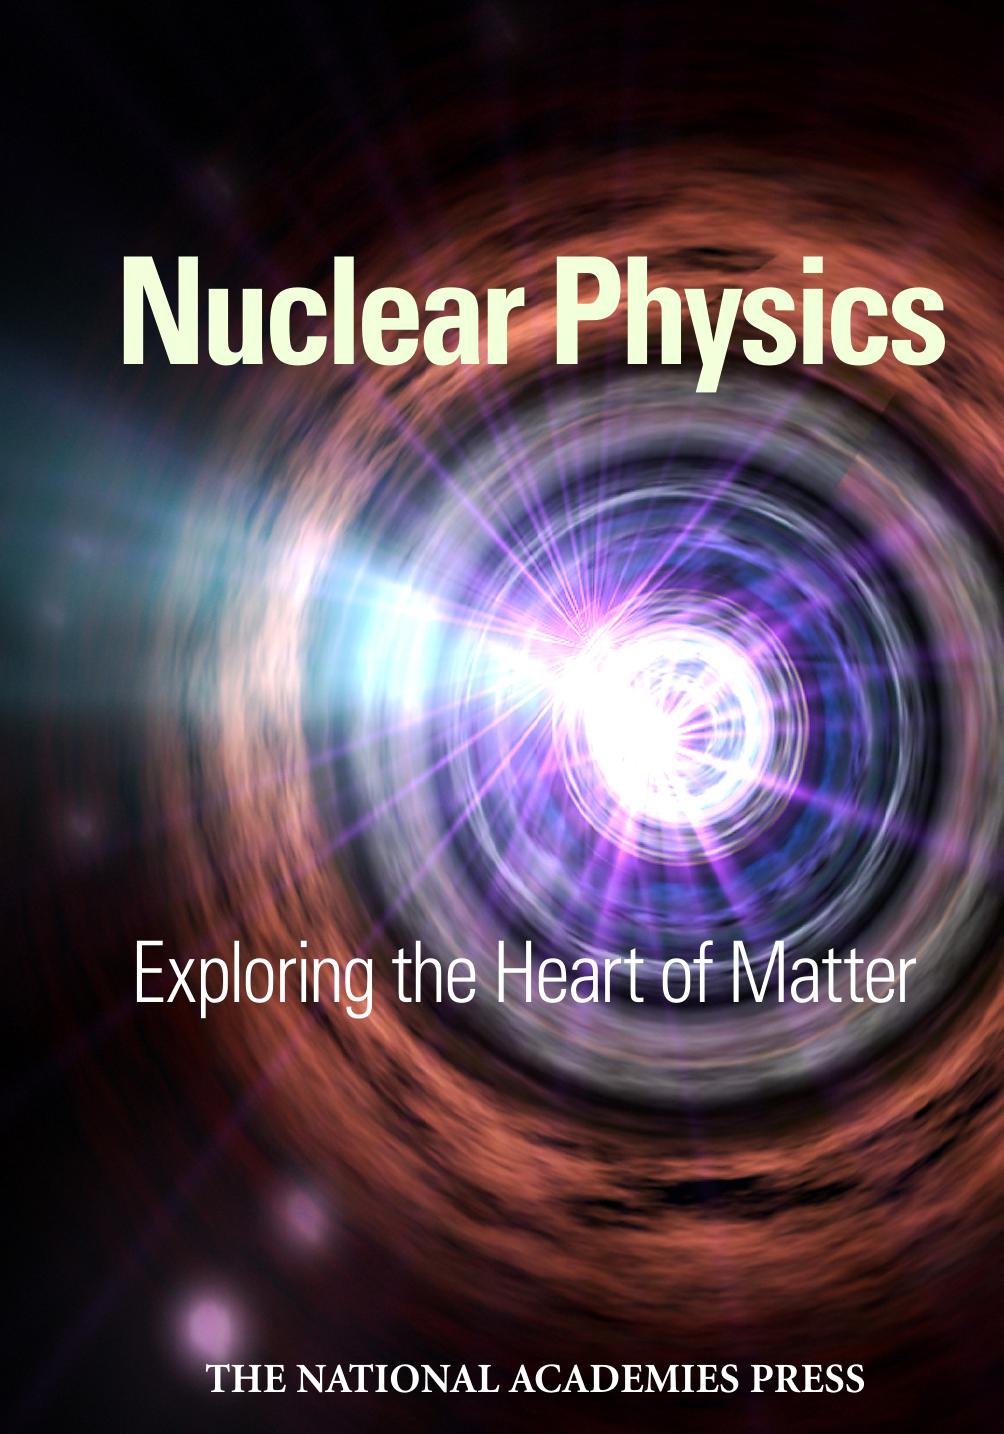 Nuclear Physics Exploring the Heart of Matter 2013